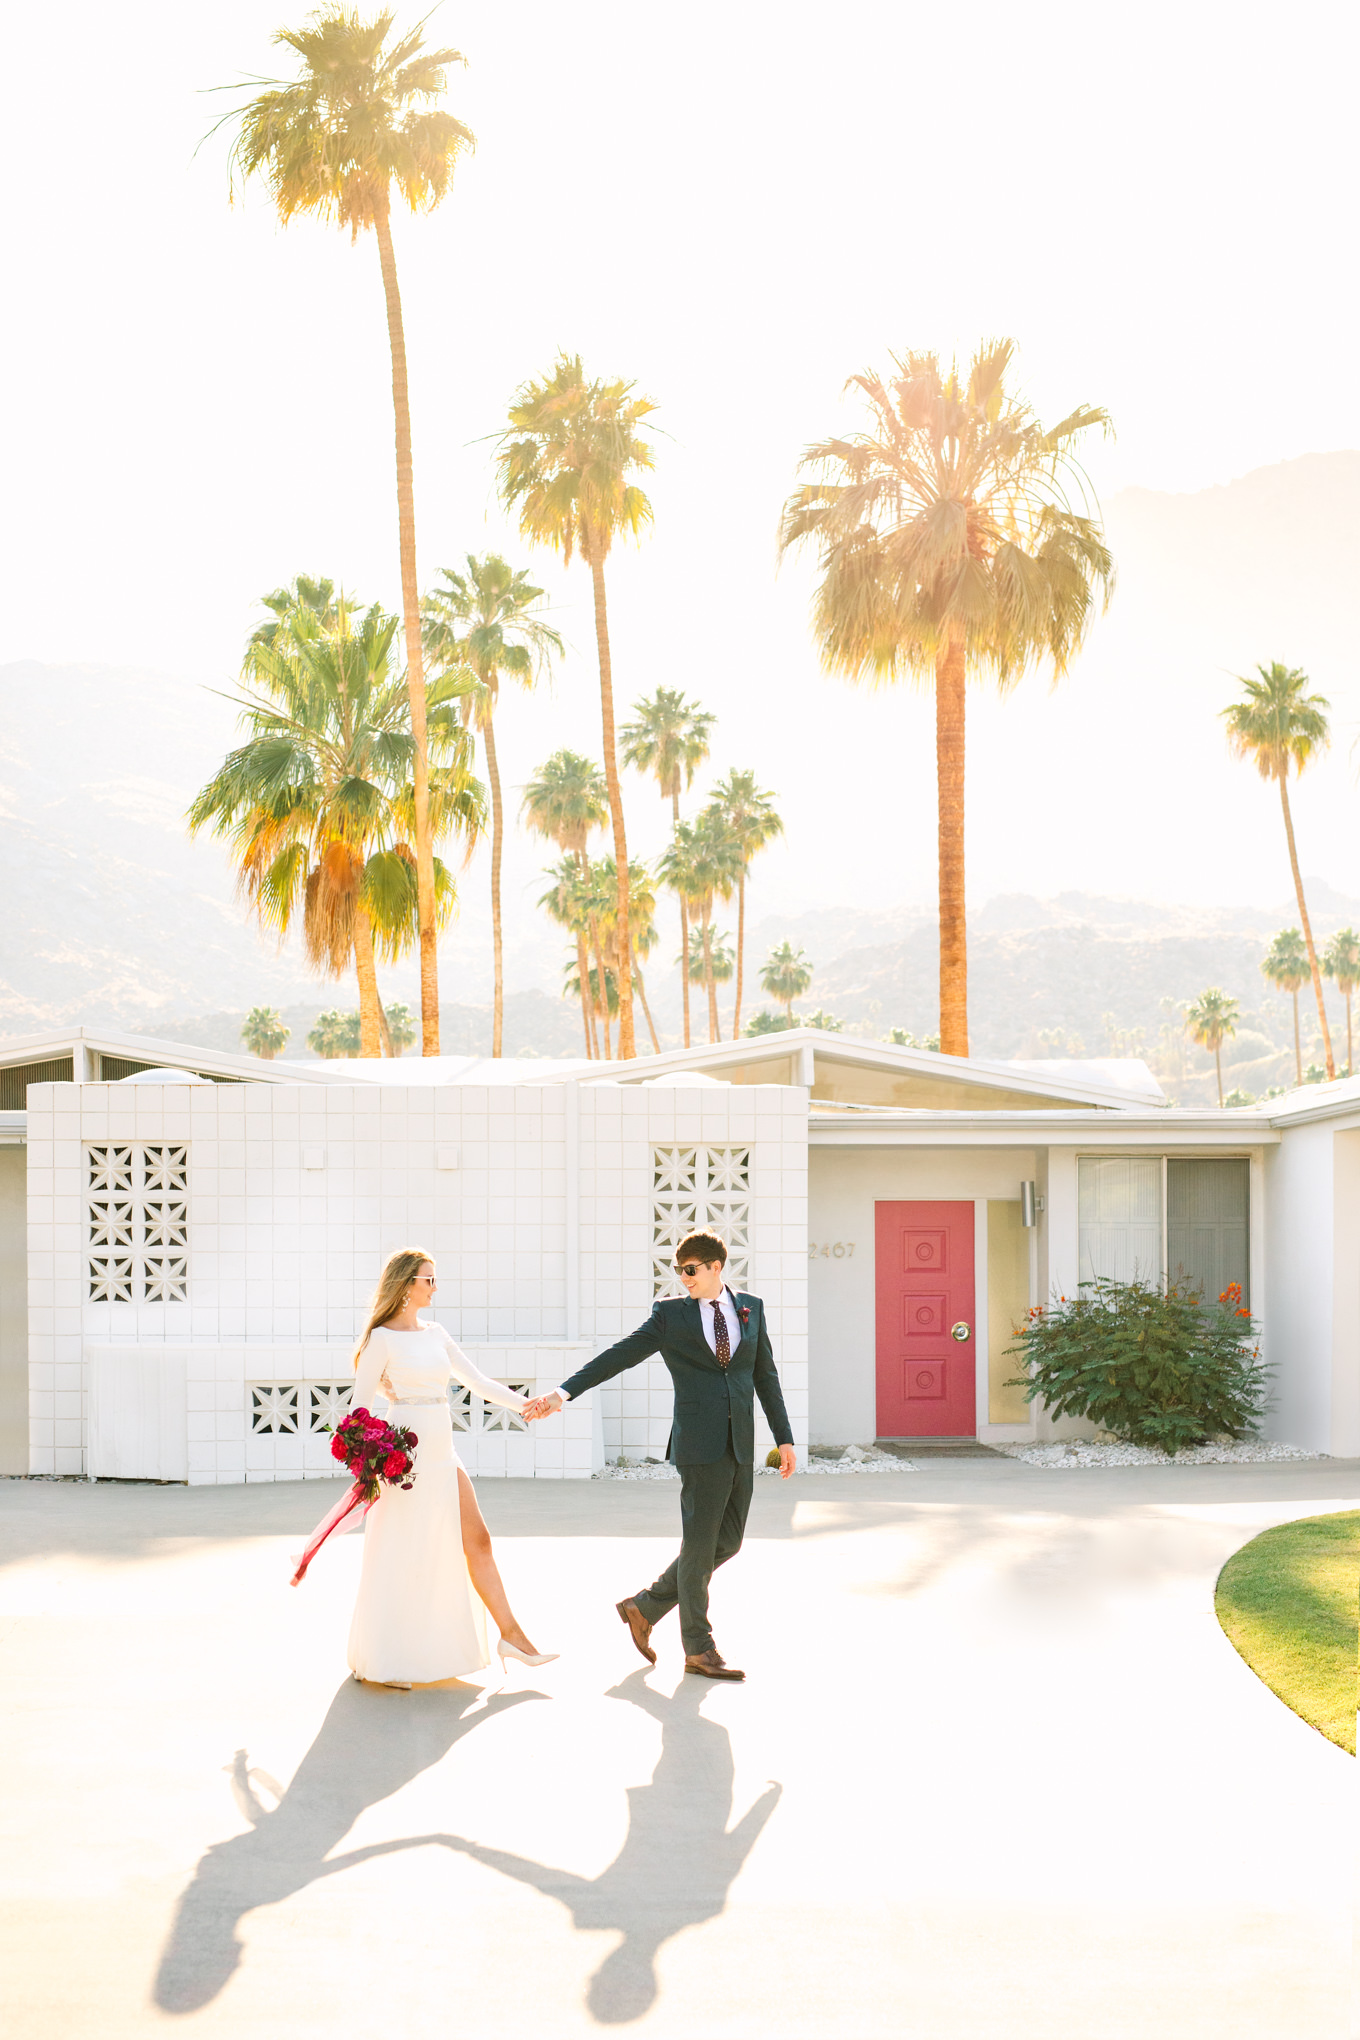 Mid Century Modern house with pink door | Colorful jewel tone Palm Springs elopement | Fresh and colorful photography for fun-loving couples in Southern California | #colorfulelopement #palmspringselopement #elopementphotography #palmspringswedding Source: Mary Costa Photography | Los Angeles